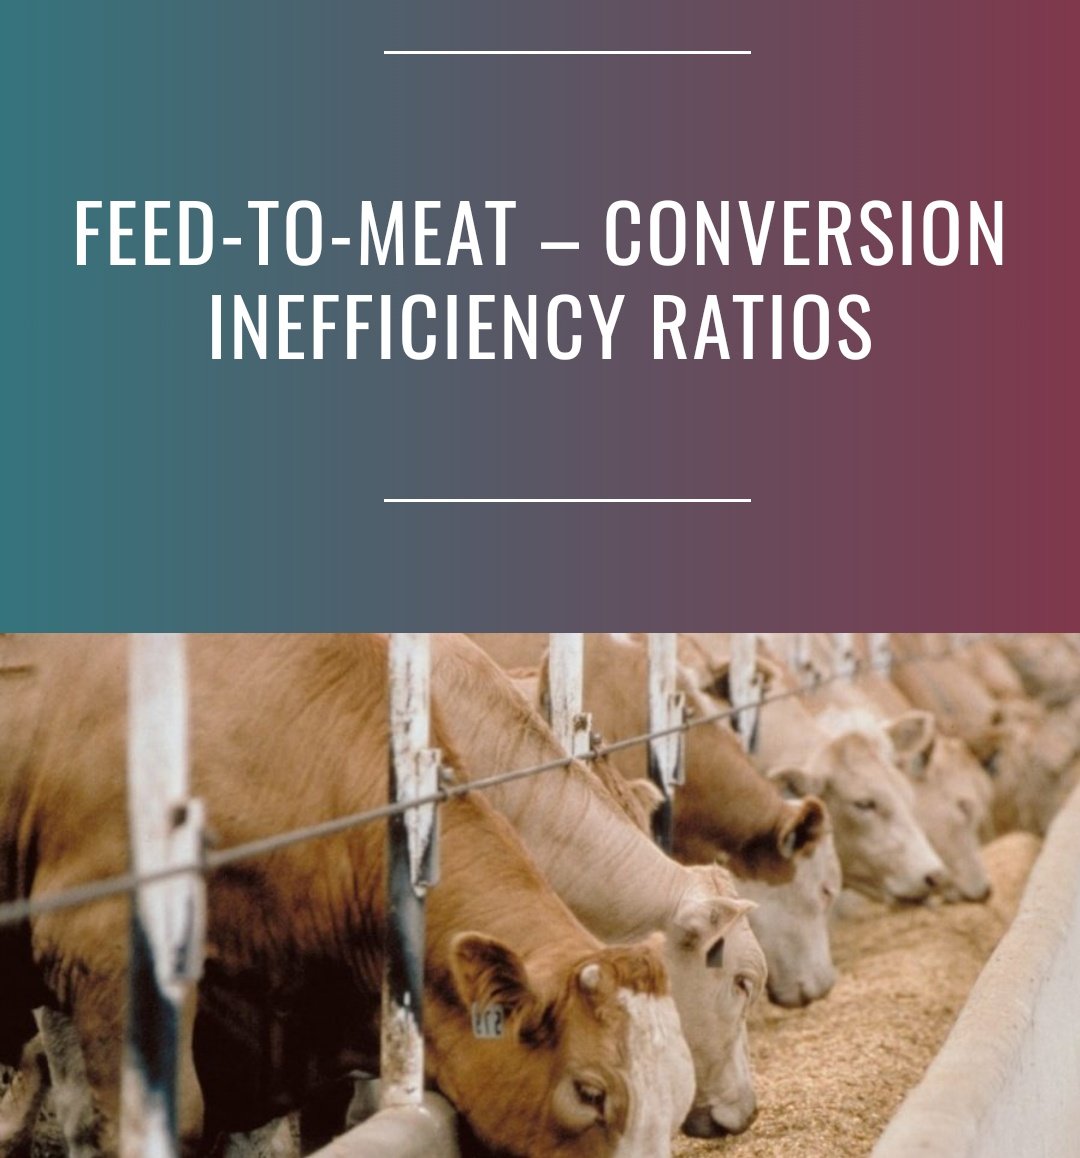 Why is feed conversion ratio important?1. This is food waste2. Feedcrop land could easily grow food for human consumption.3. The gains in land by not having feedcrops can be a major help in addressing climate & biodiversity crises. https://awellfedworld.org/feed-ratios/ 